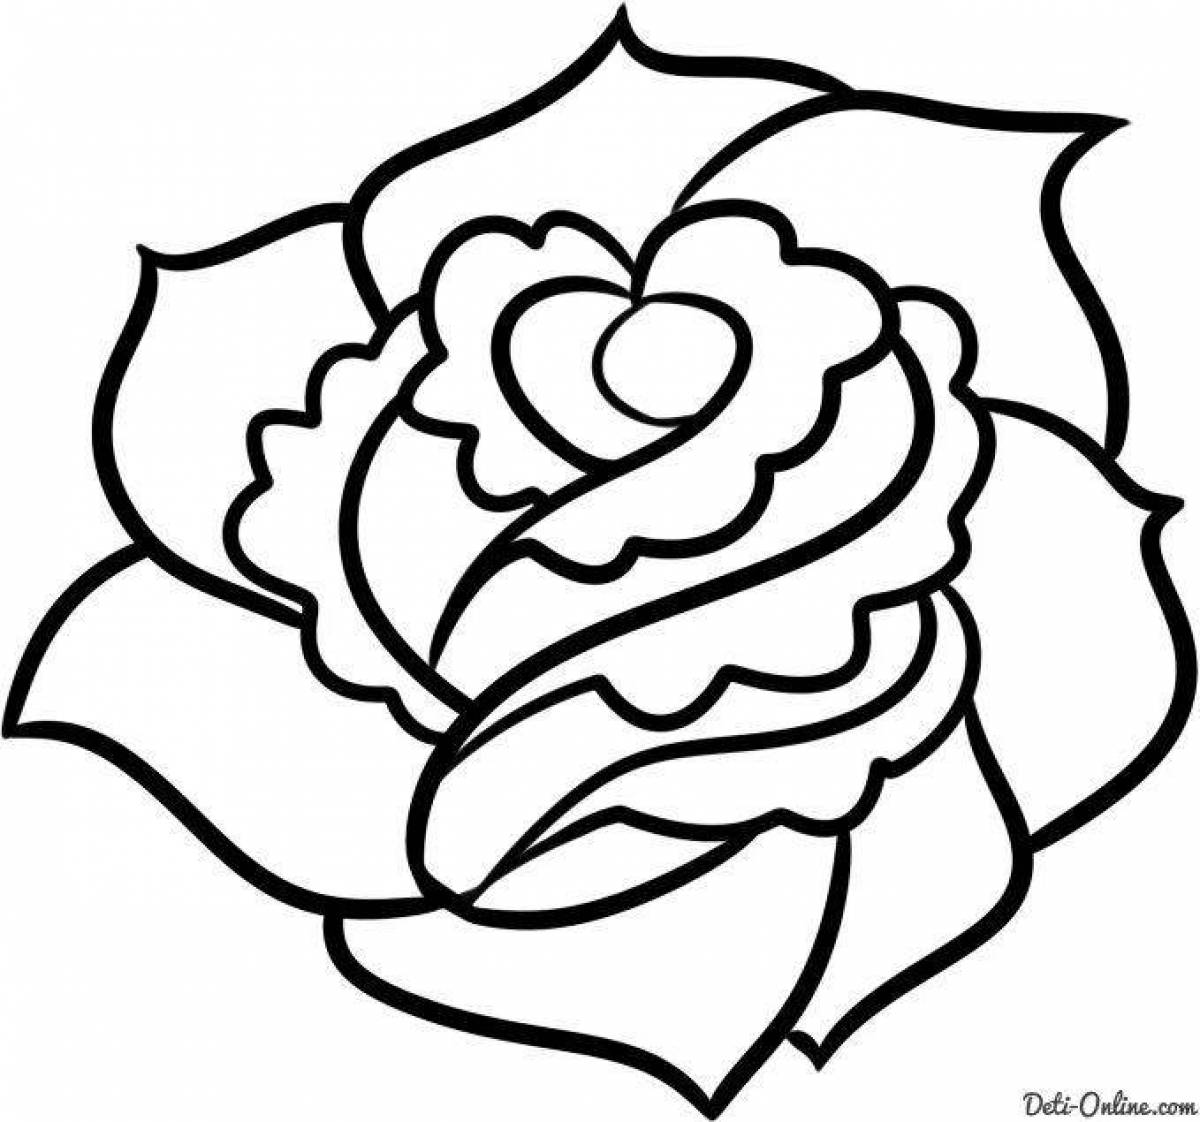 Radiant coloring page rose drawing